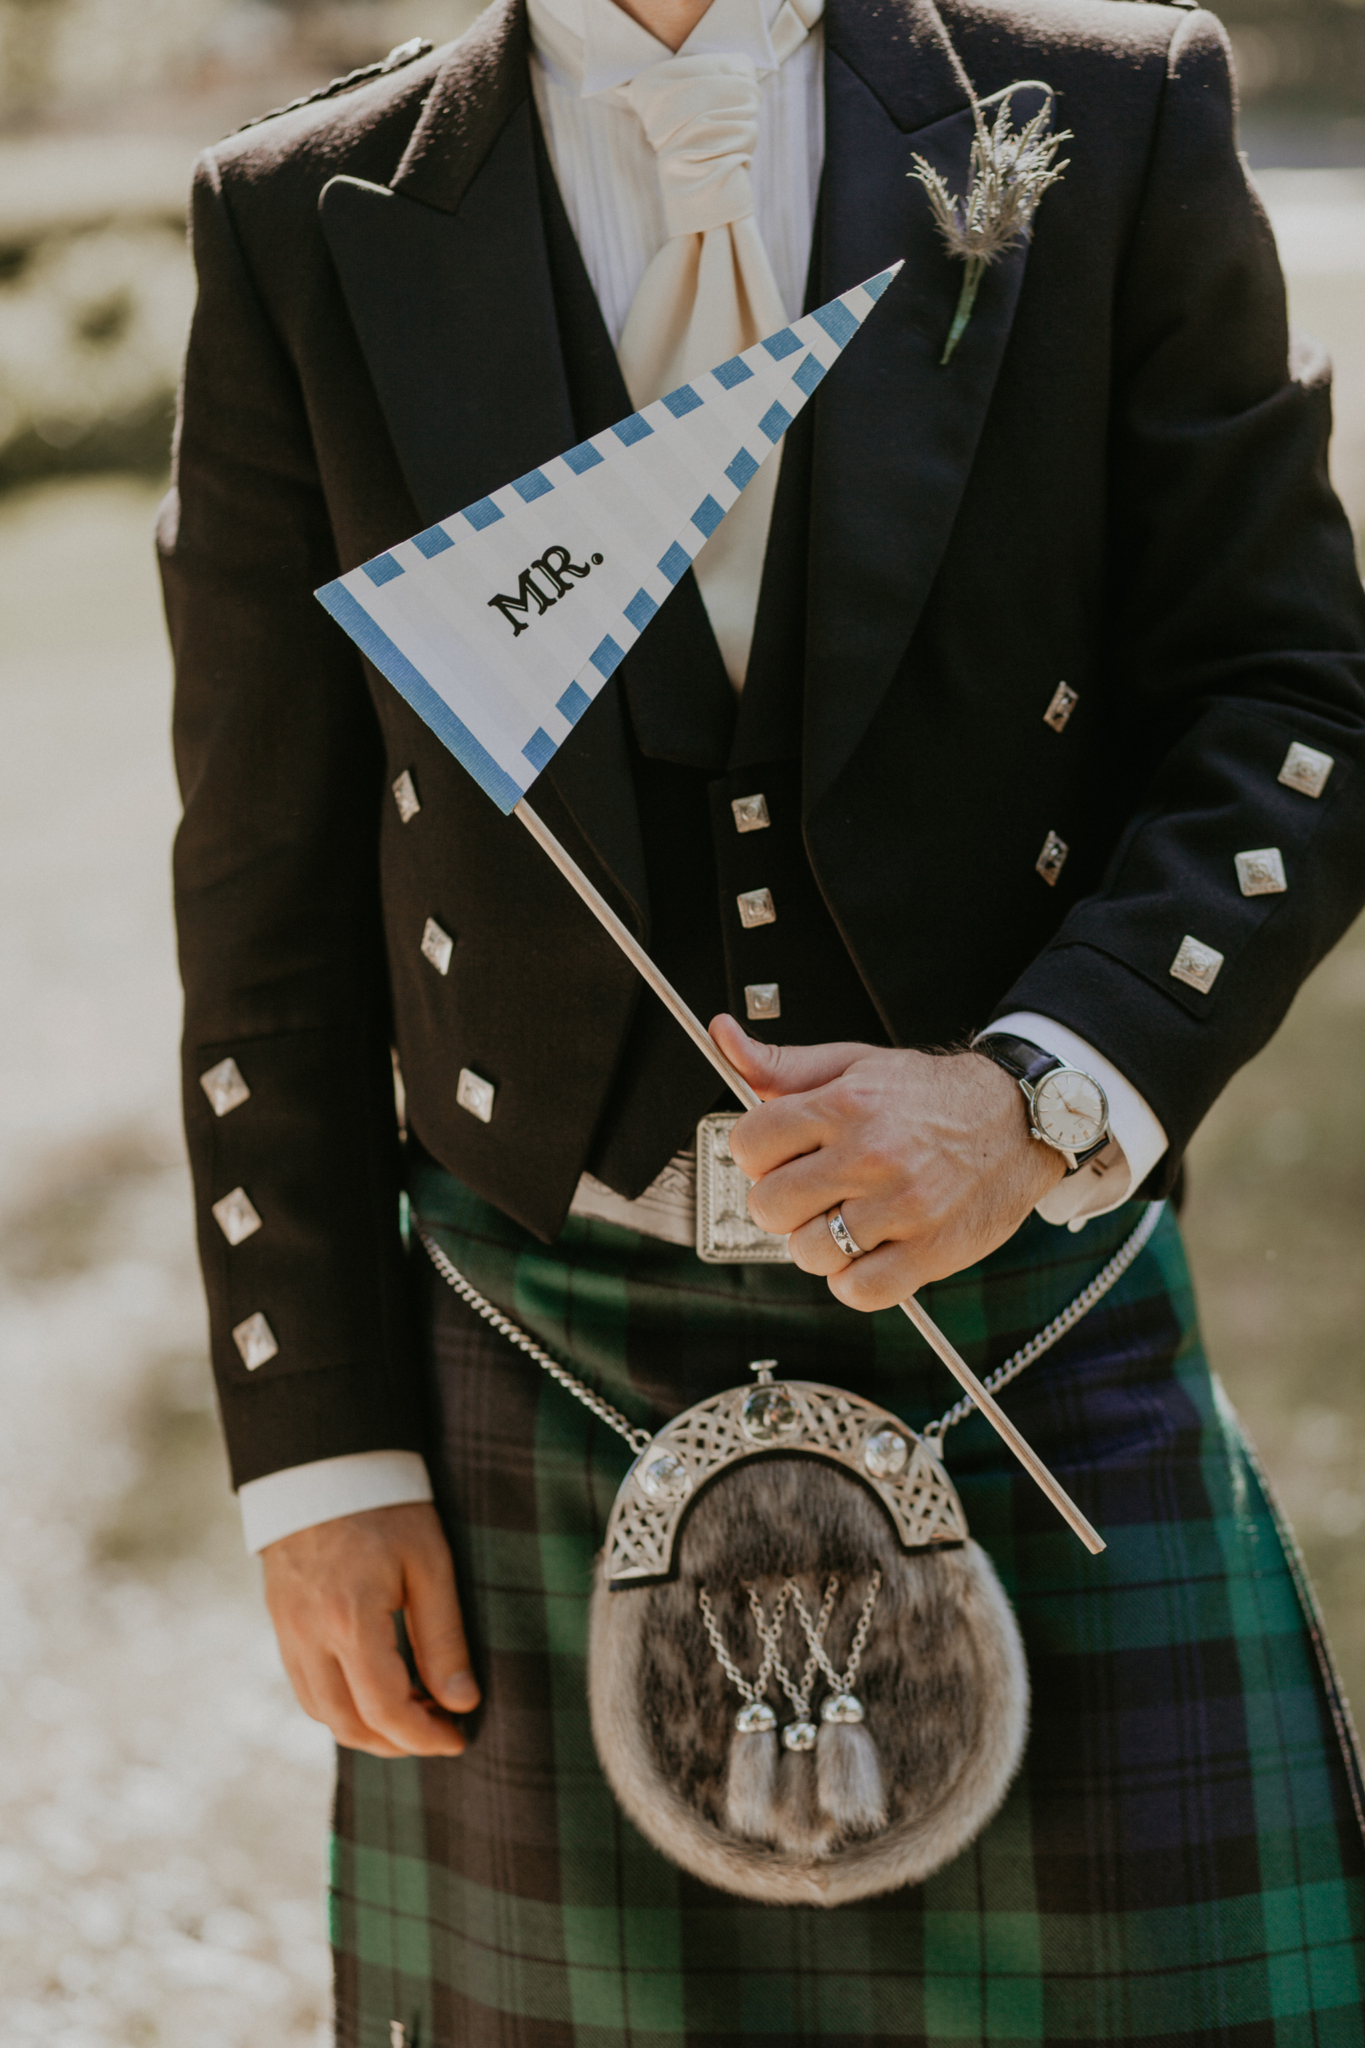 Close up of groom on wedding day holding "Mr." flag